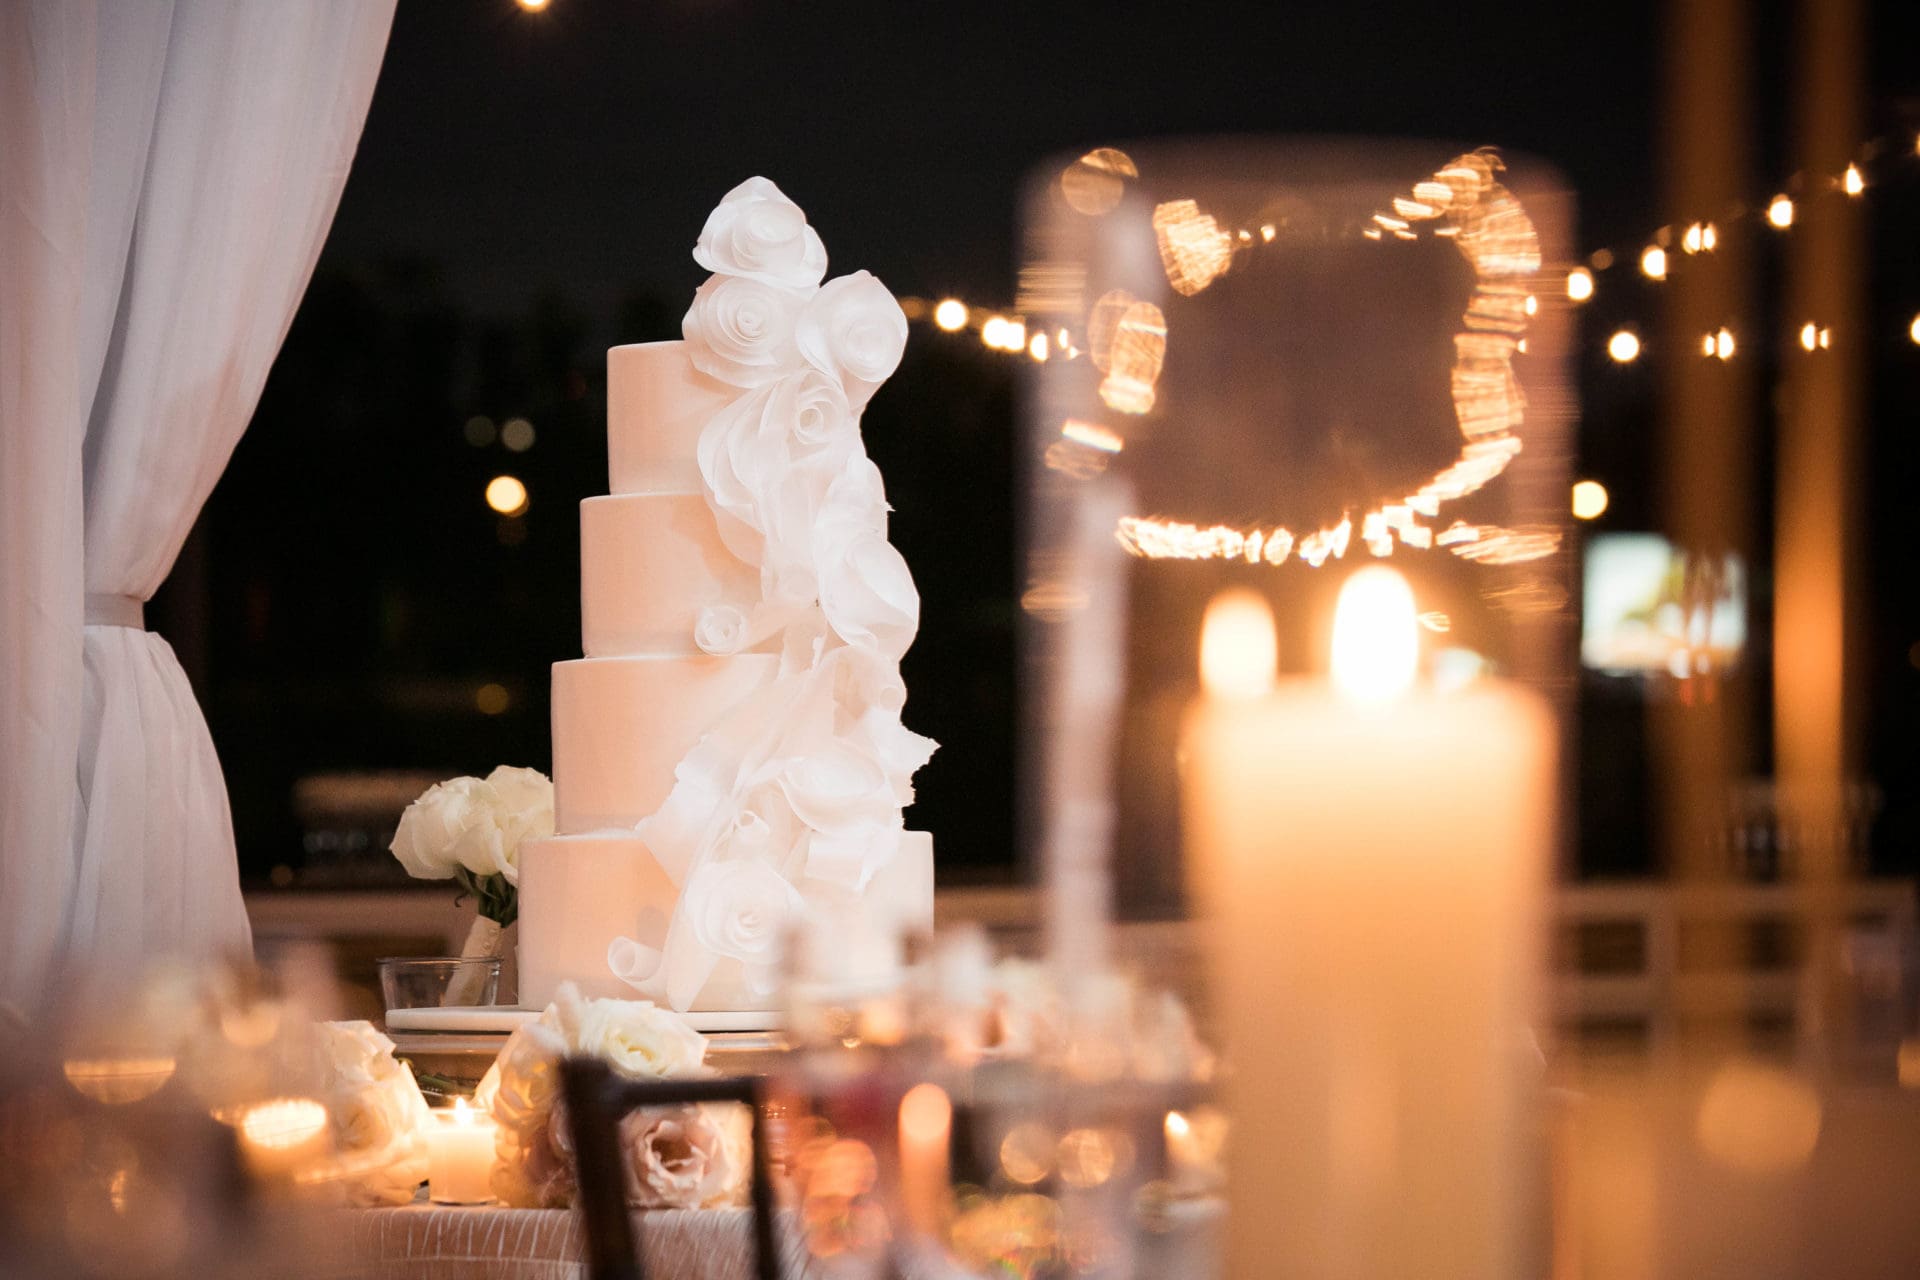 Four tiered white wedding cake with fondant bows on each tier, photographed in the reception tent